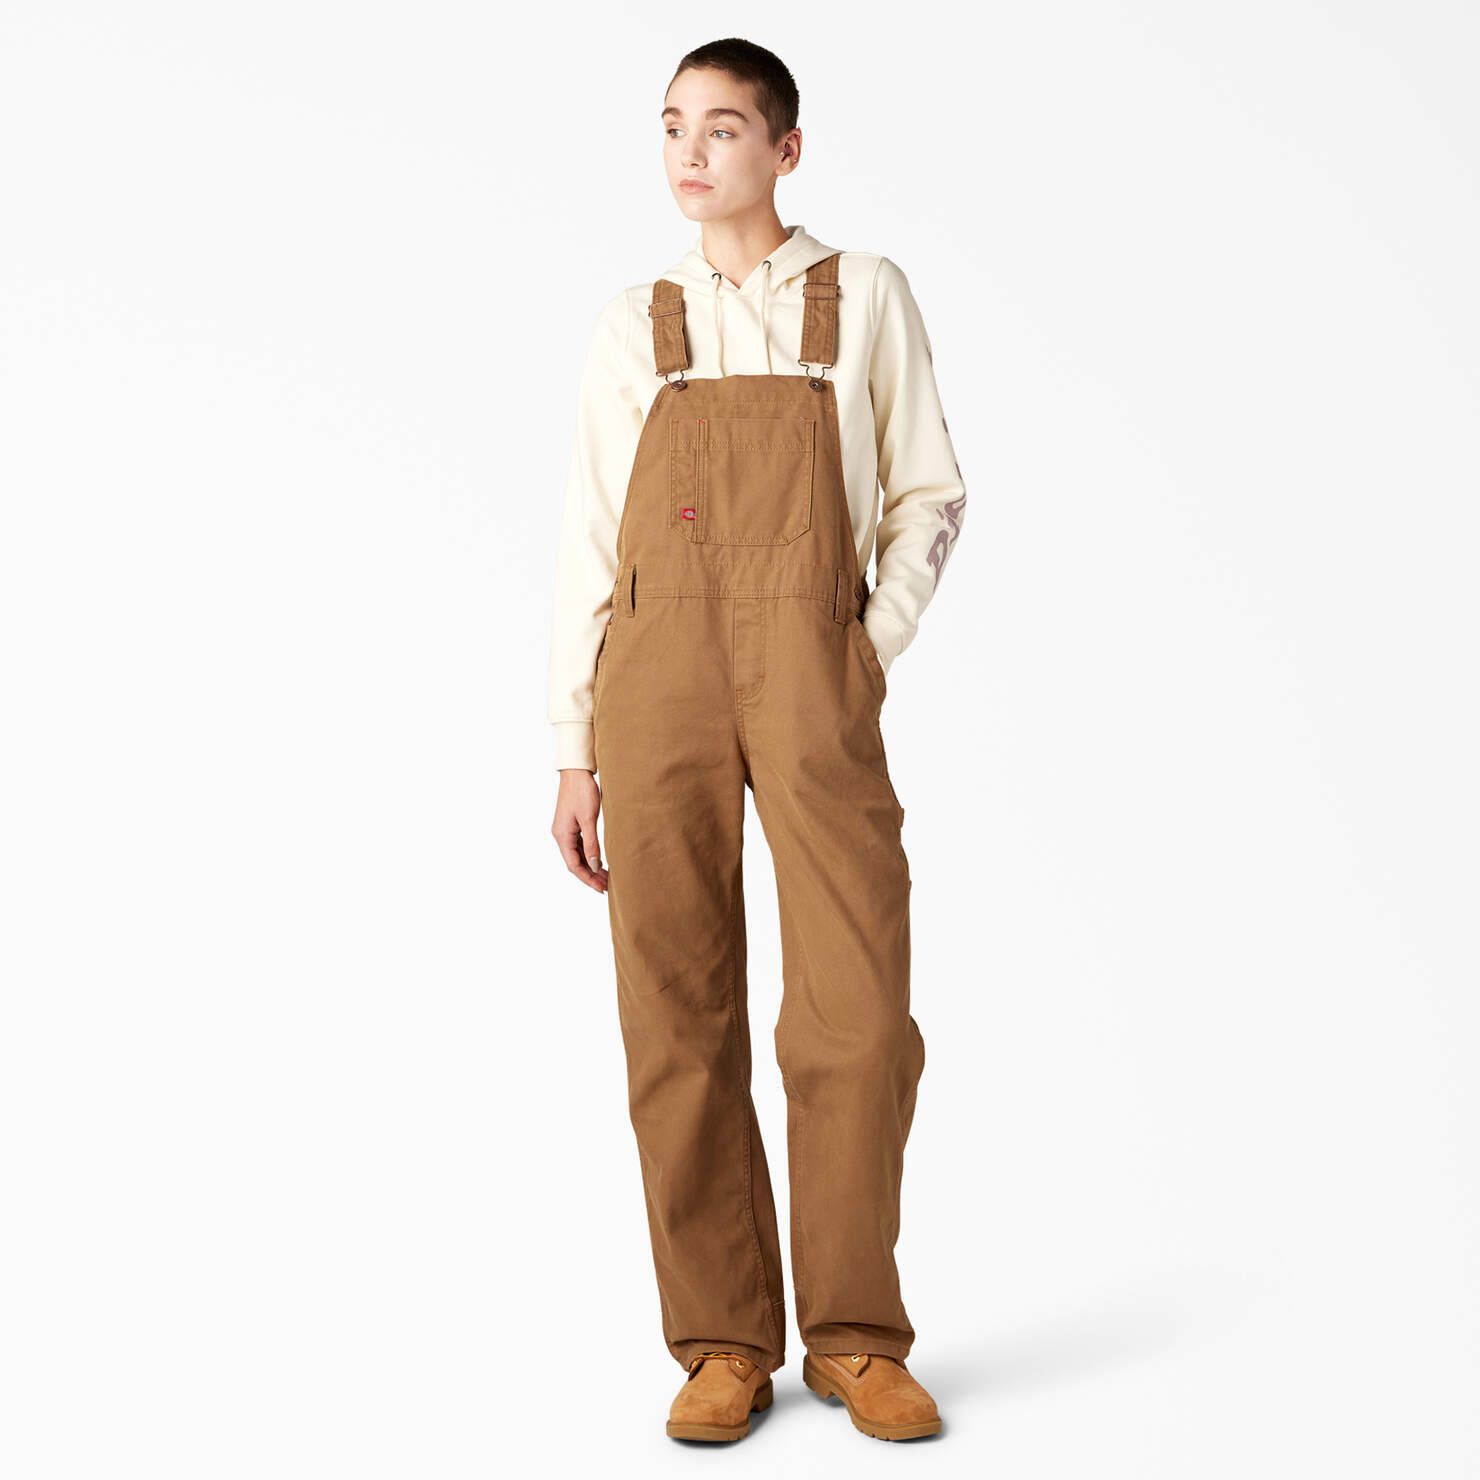 Women's Relaxed Fit Bib Overalls - Dickies US | Dickies